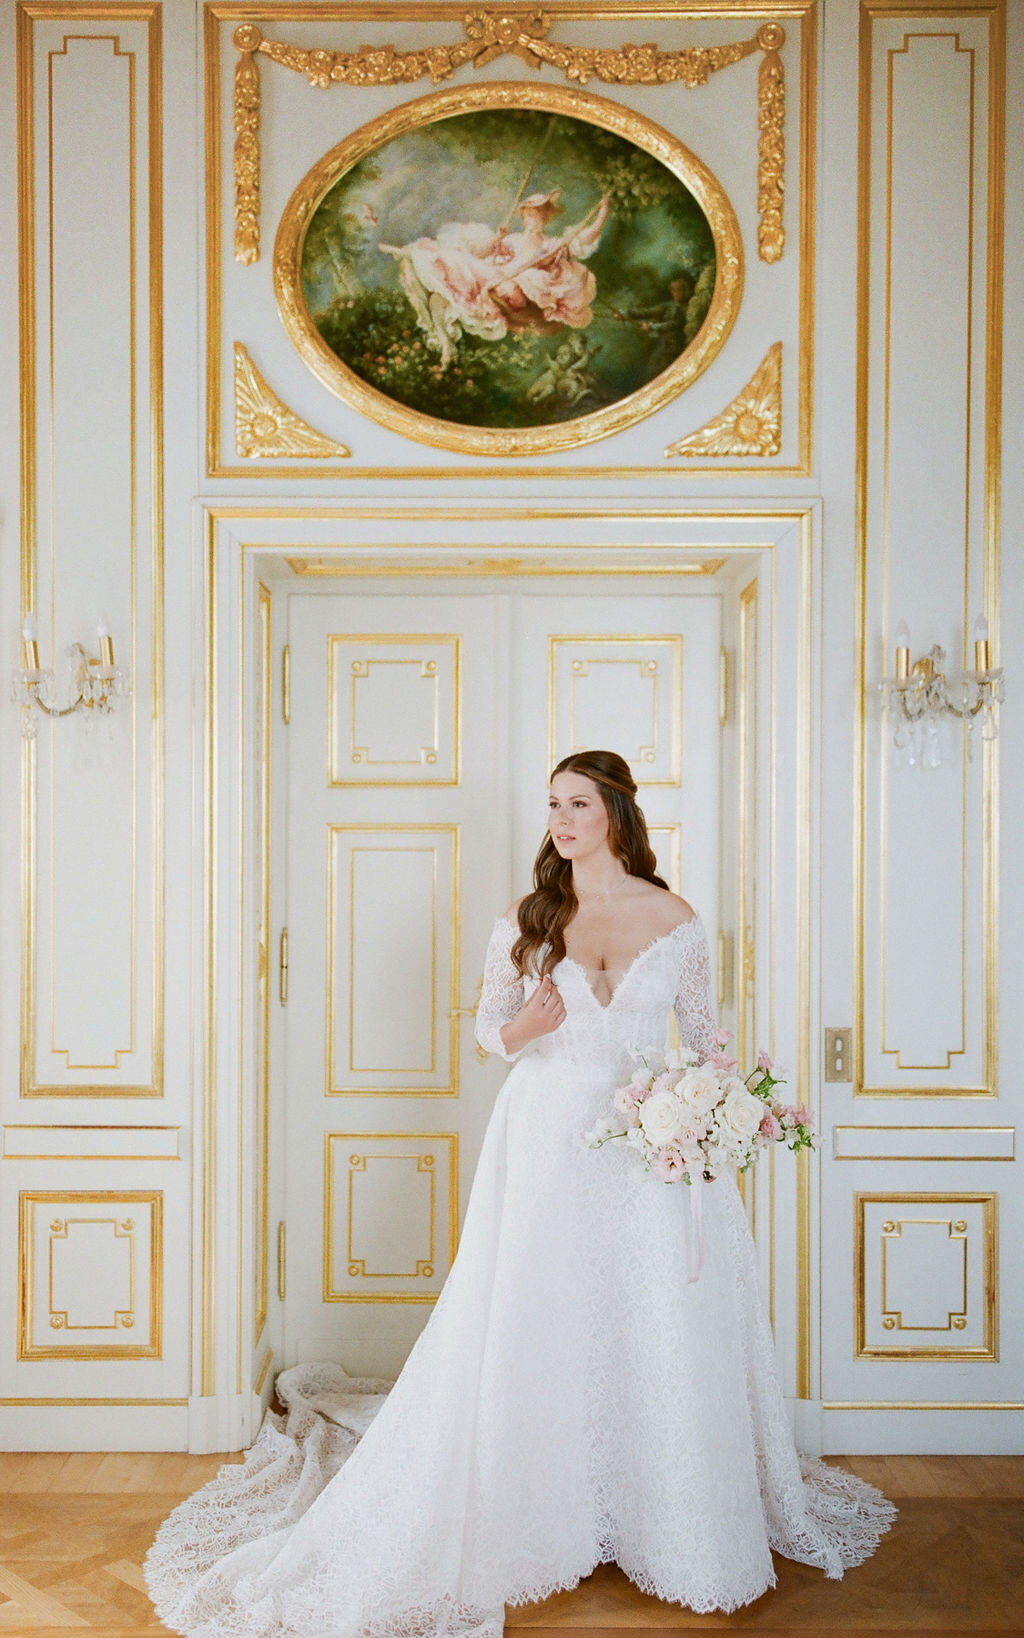 Jennifer Fox Weddings English speaking wedding planning & design agency in France crafting refined and bespoke weddings and celebrations Provence, Paris and destination Alyssa-Aaron-Wedding-Molly-Carr-Photography-Bride-Prep-46